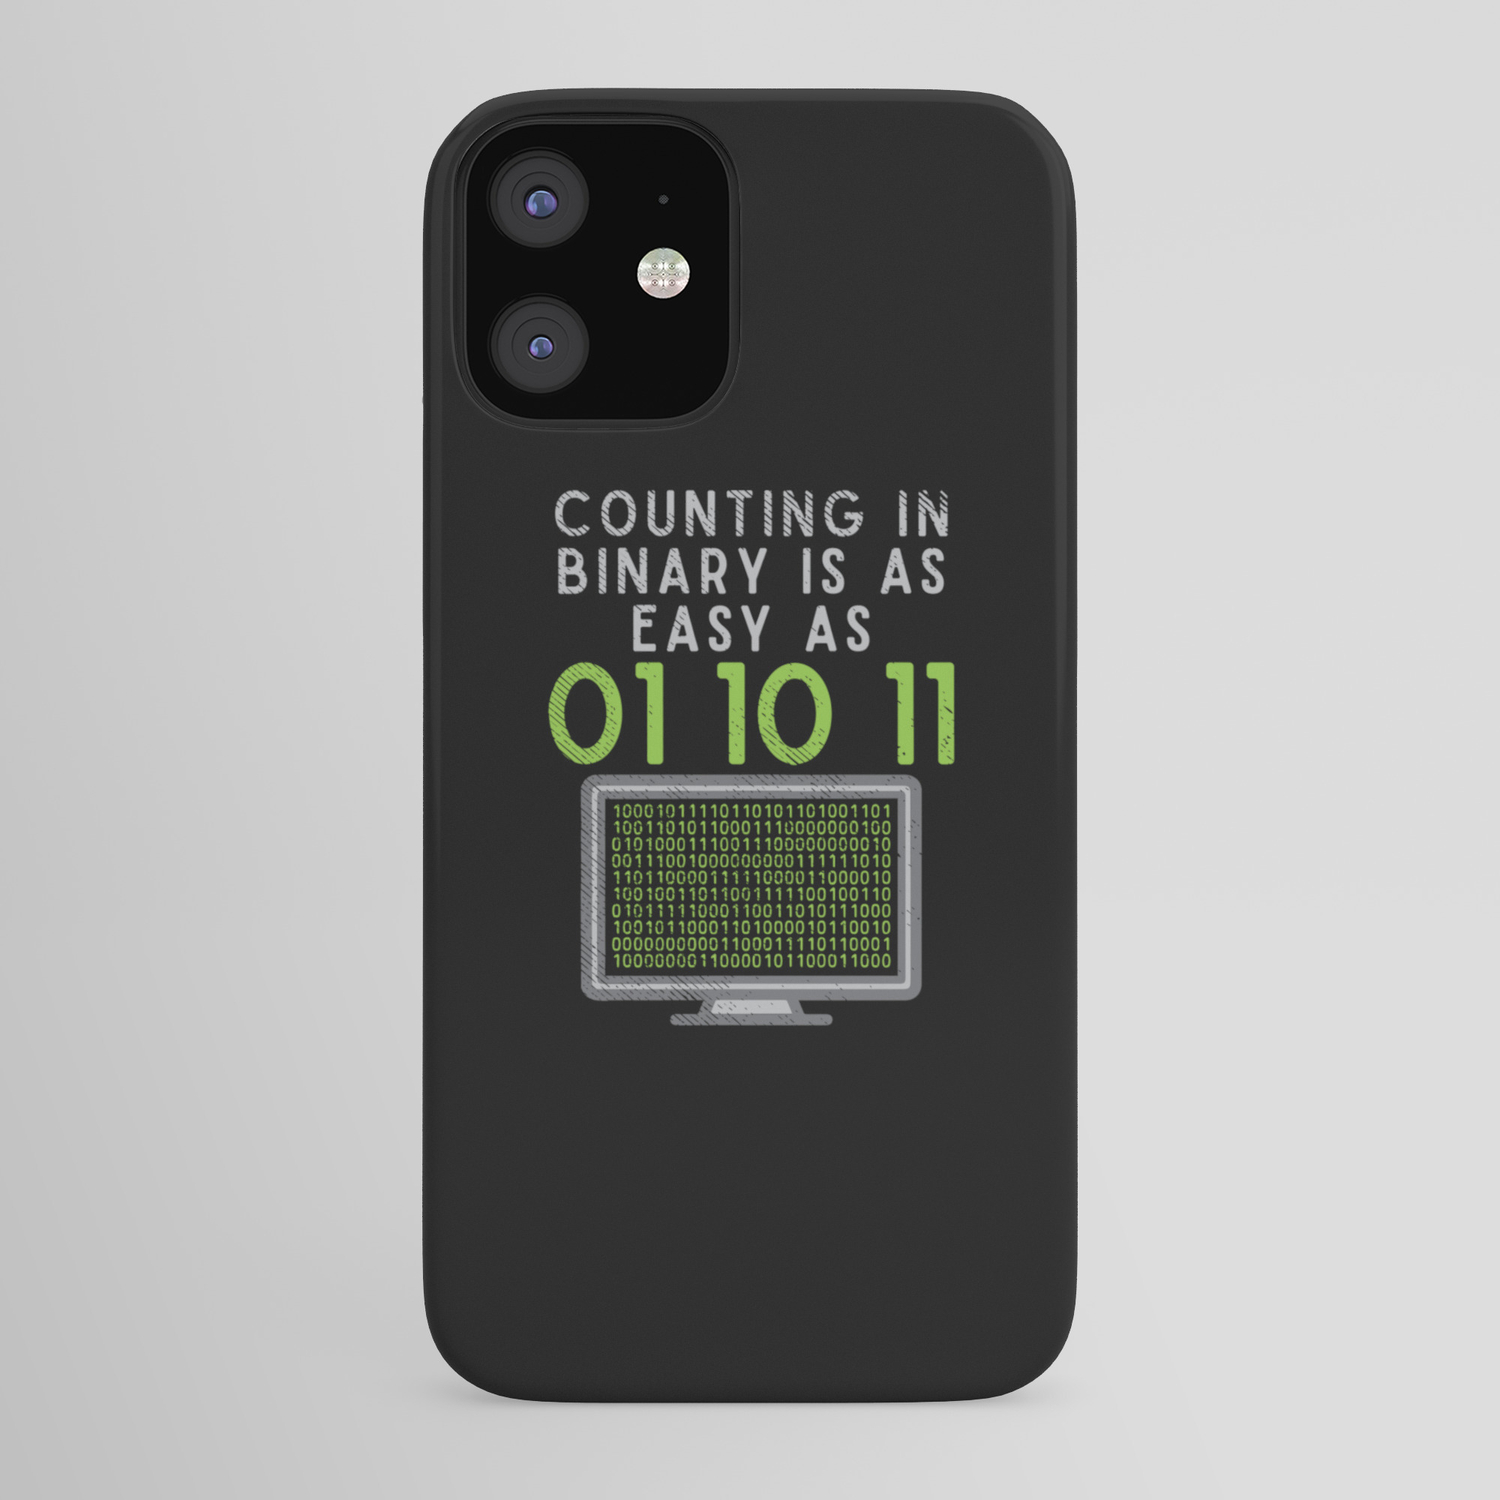 Counting In Binary Is As Easy As 01 10 11 Iphone Case By Seiewu Society6